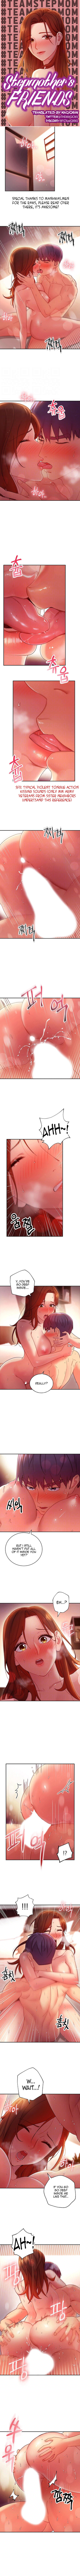 Panel Image 1 for chapter 61 of manhwa Stepmother